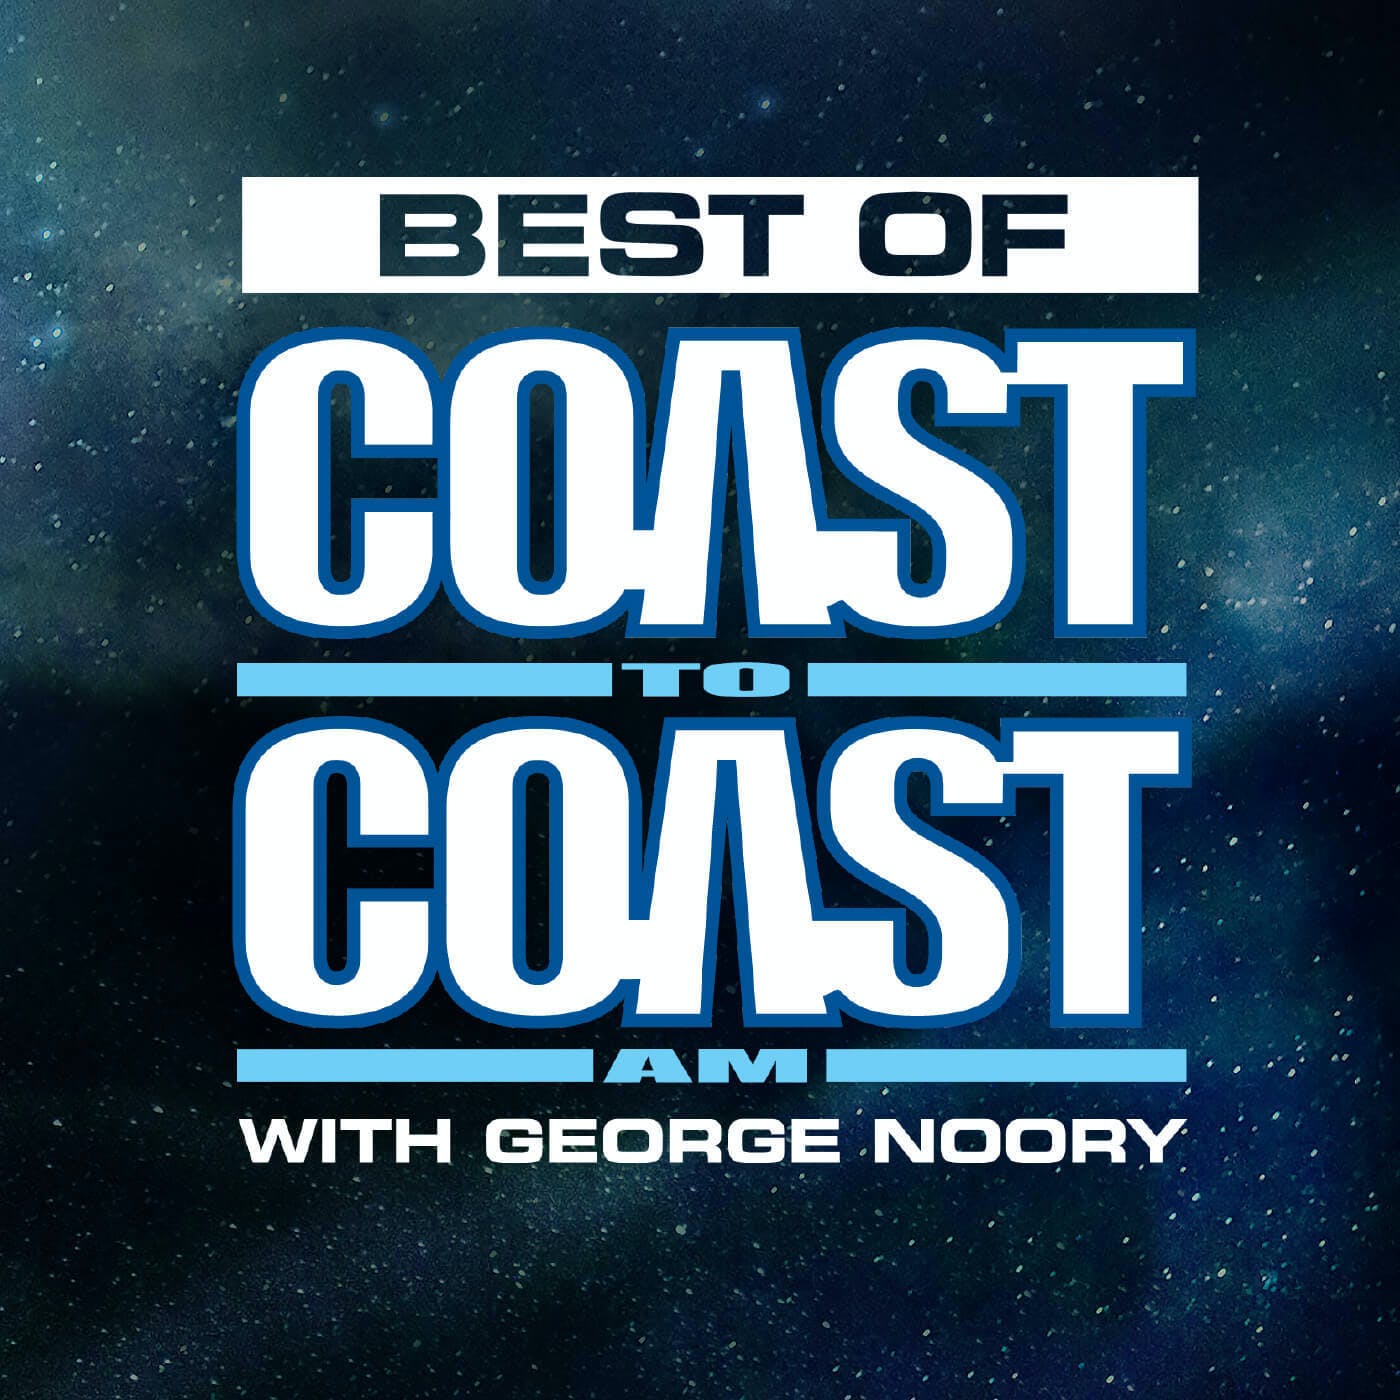 Timothy Leary - Best of Coast to Coast AM - 10/7/21